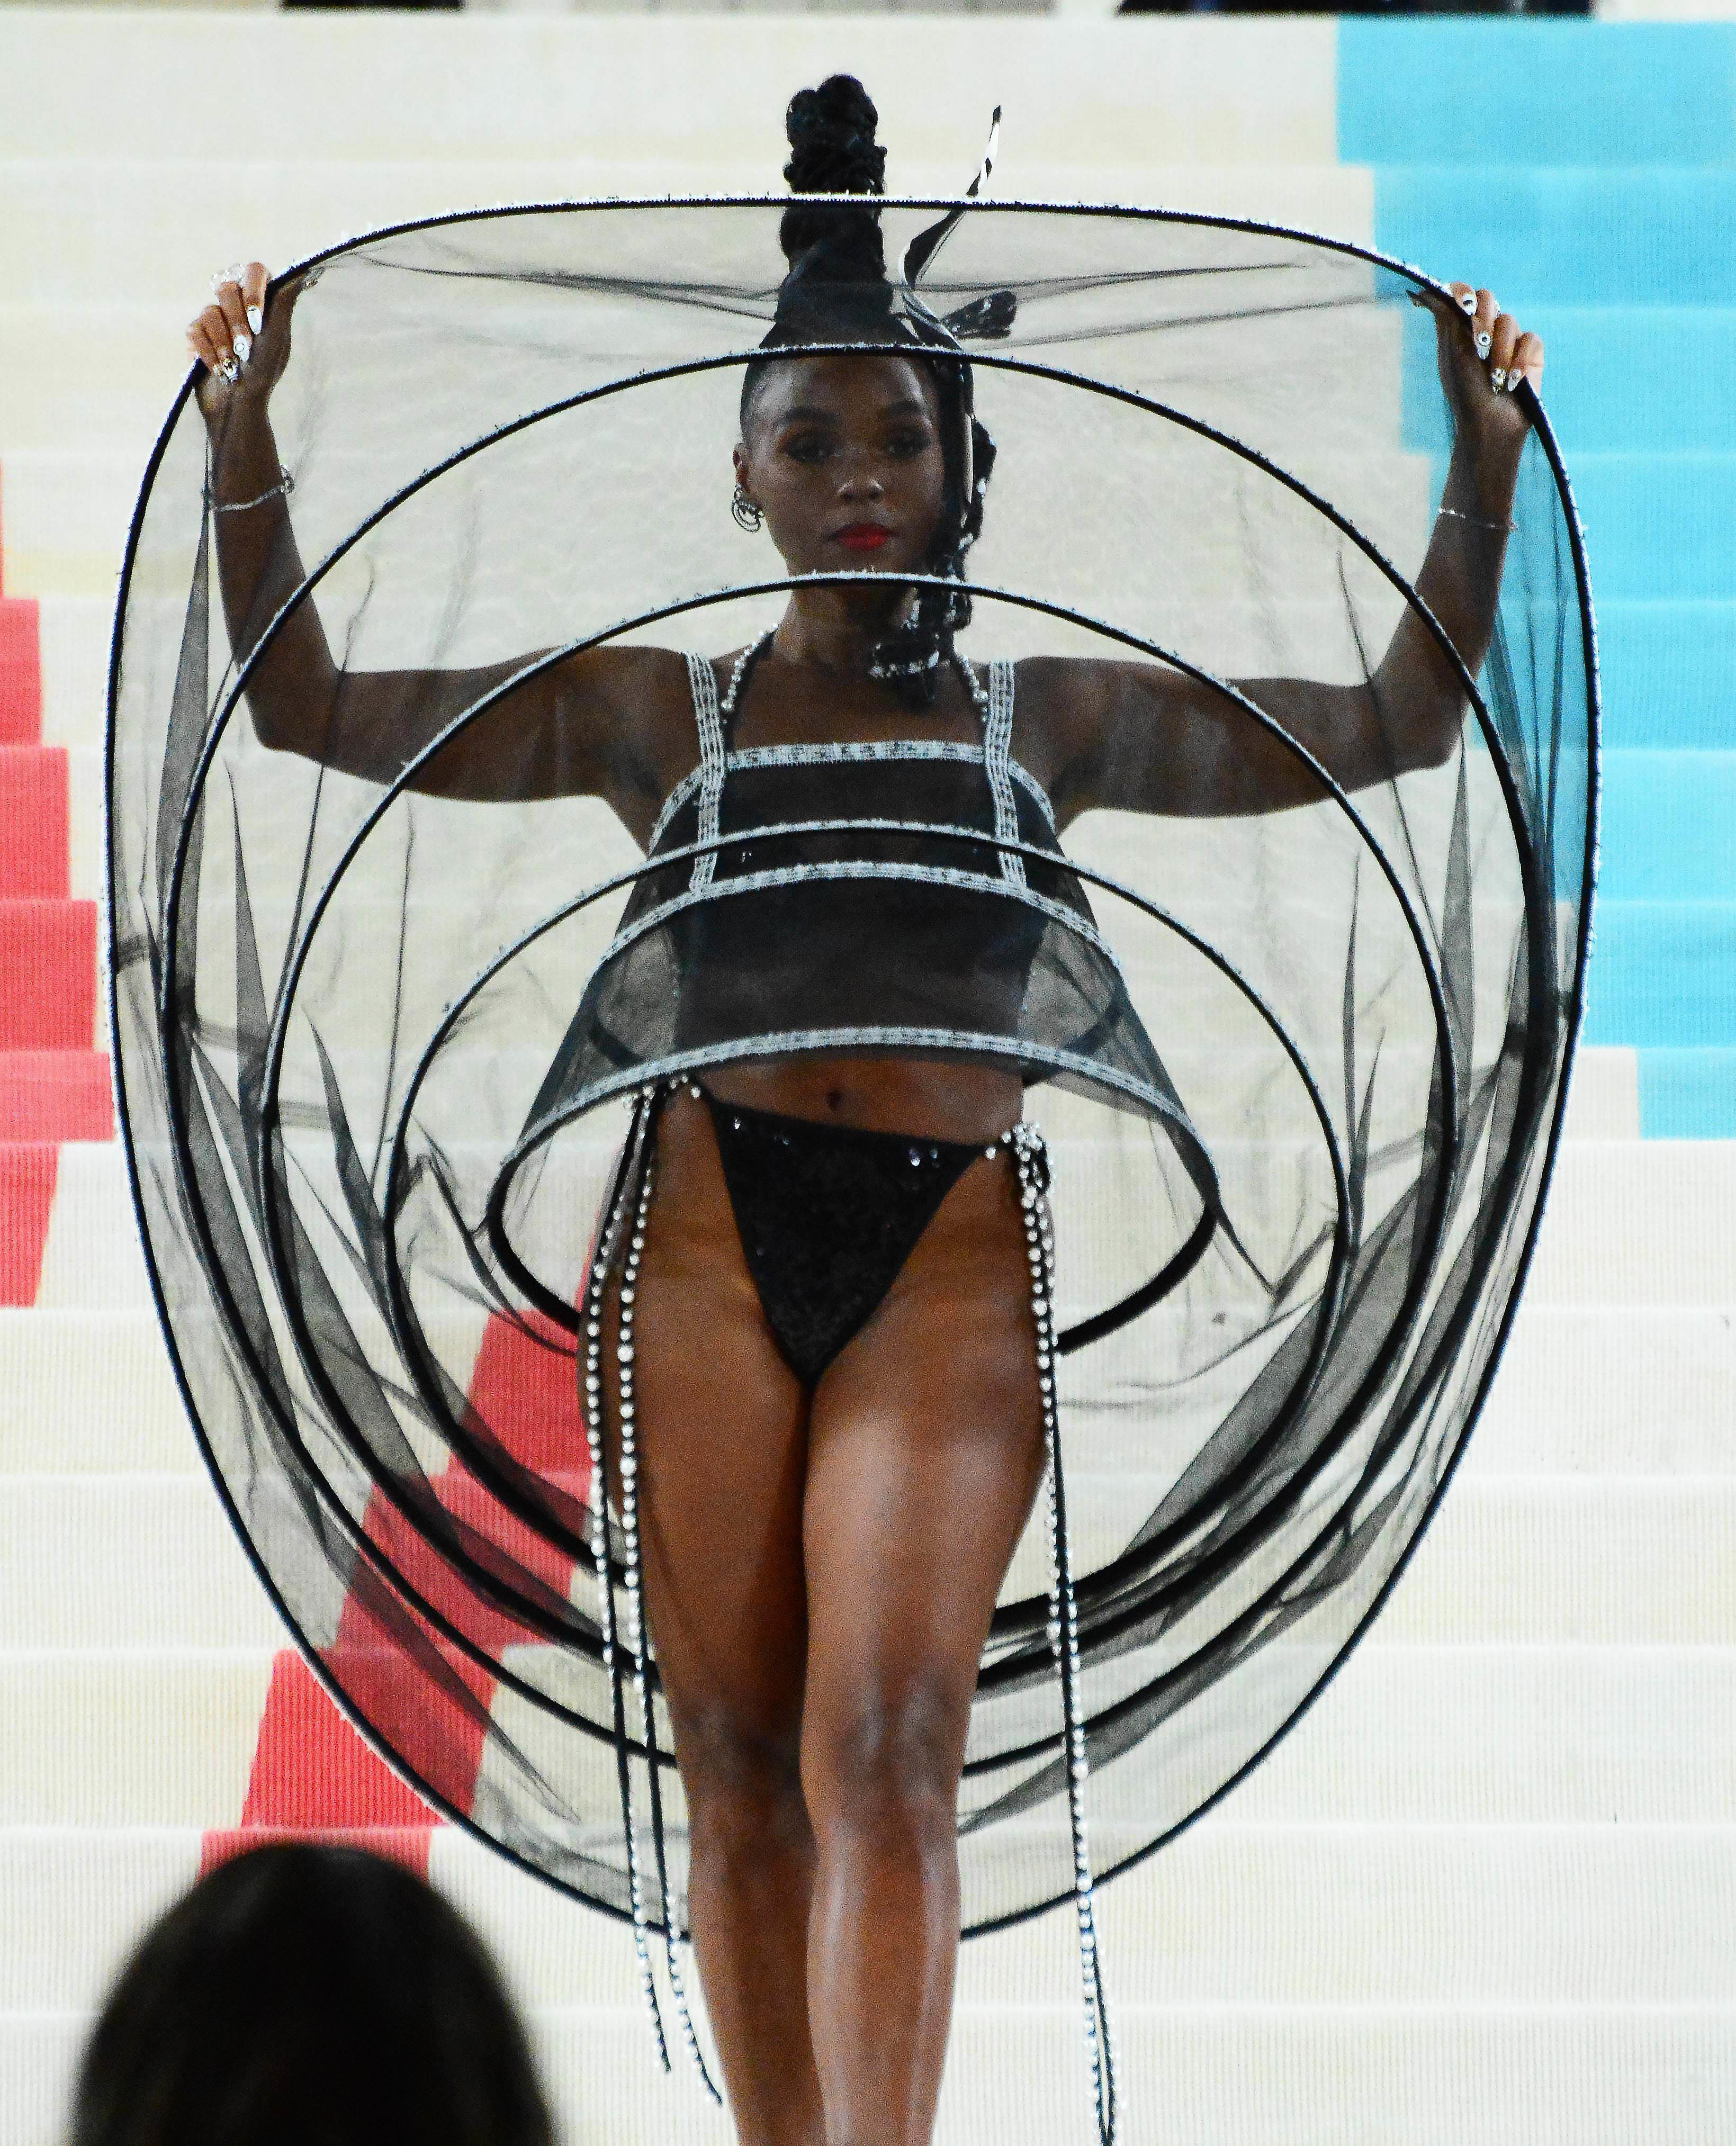 Person in black outfit with a sheer, hoop-embellished cover at an event